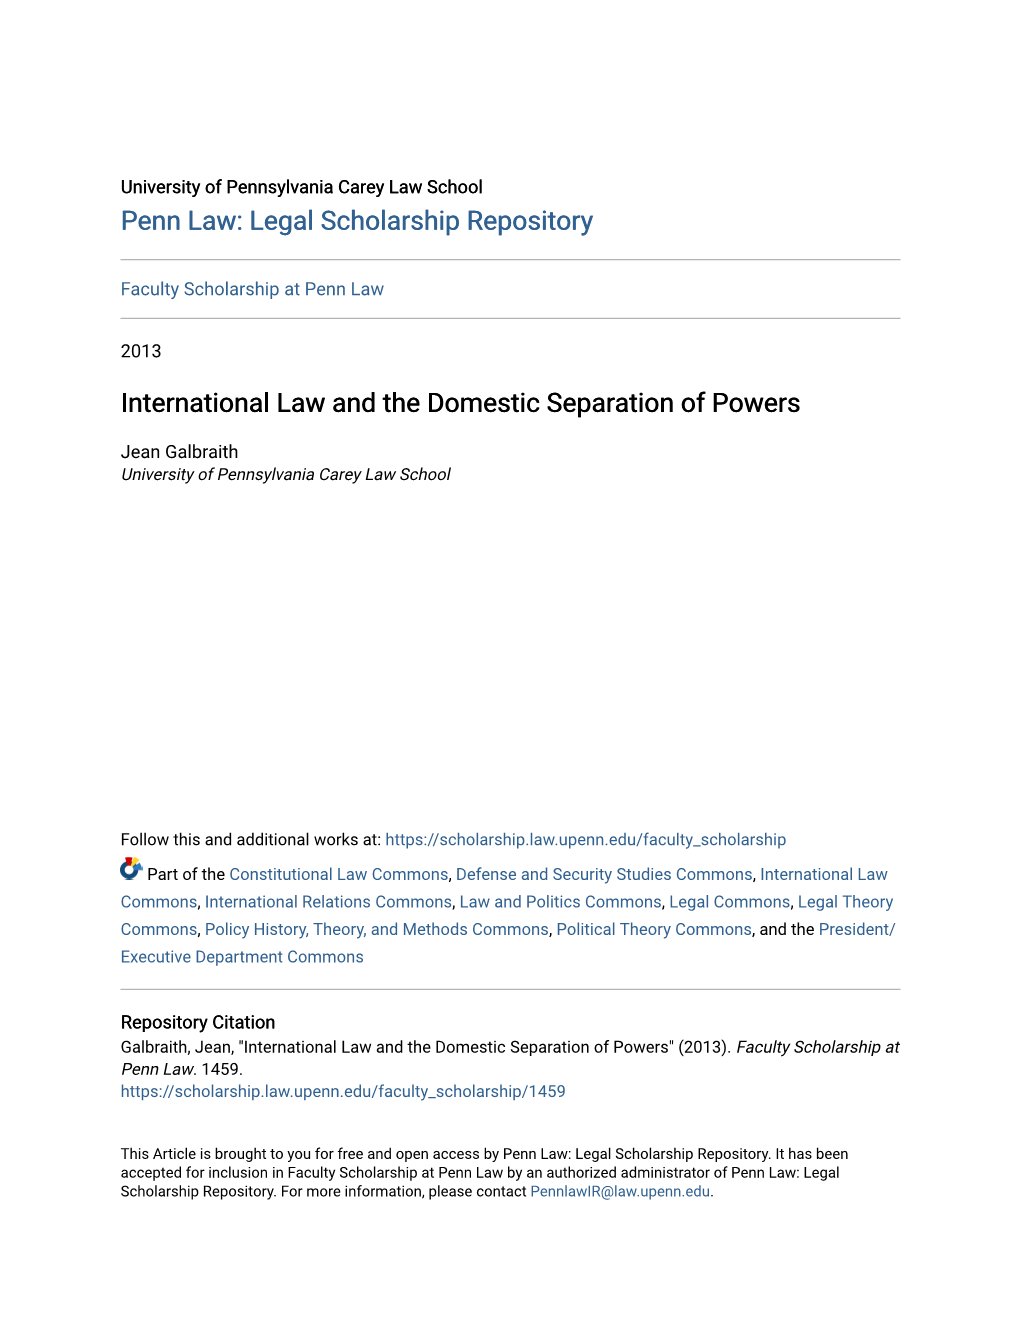 International Law and the Domestic Separation of Powers